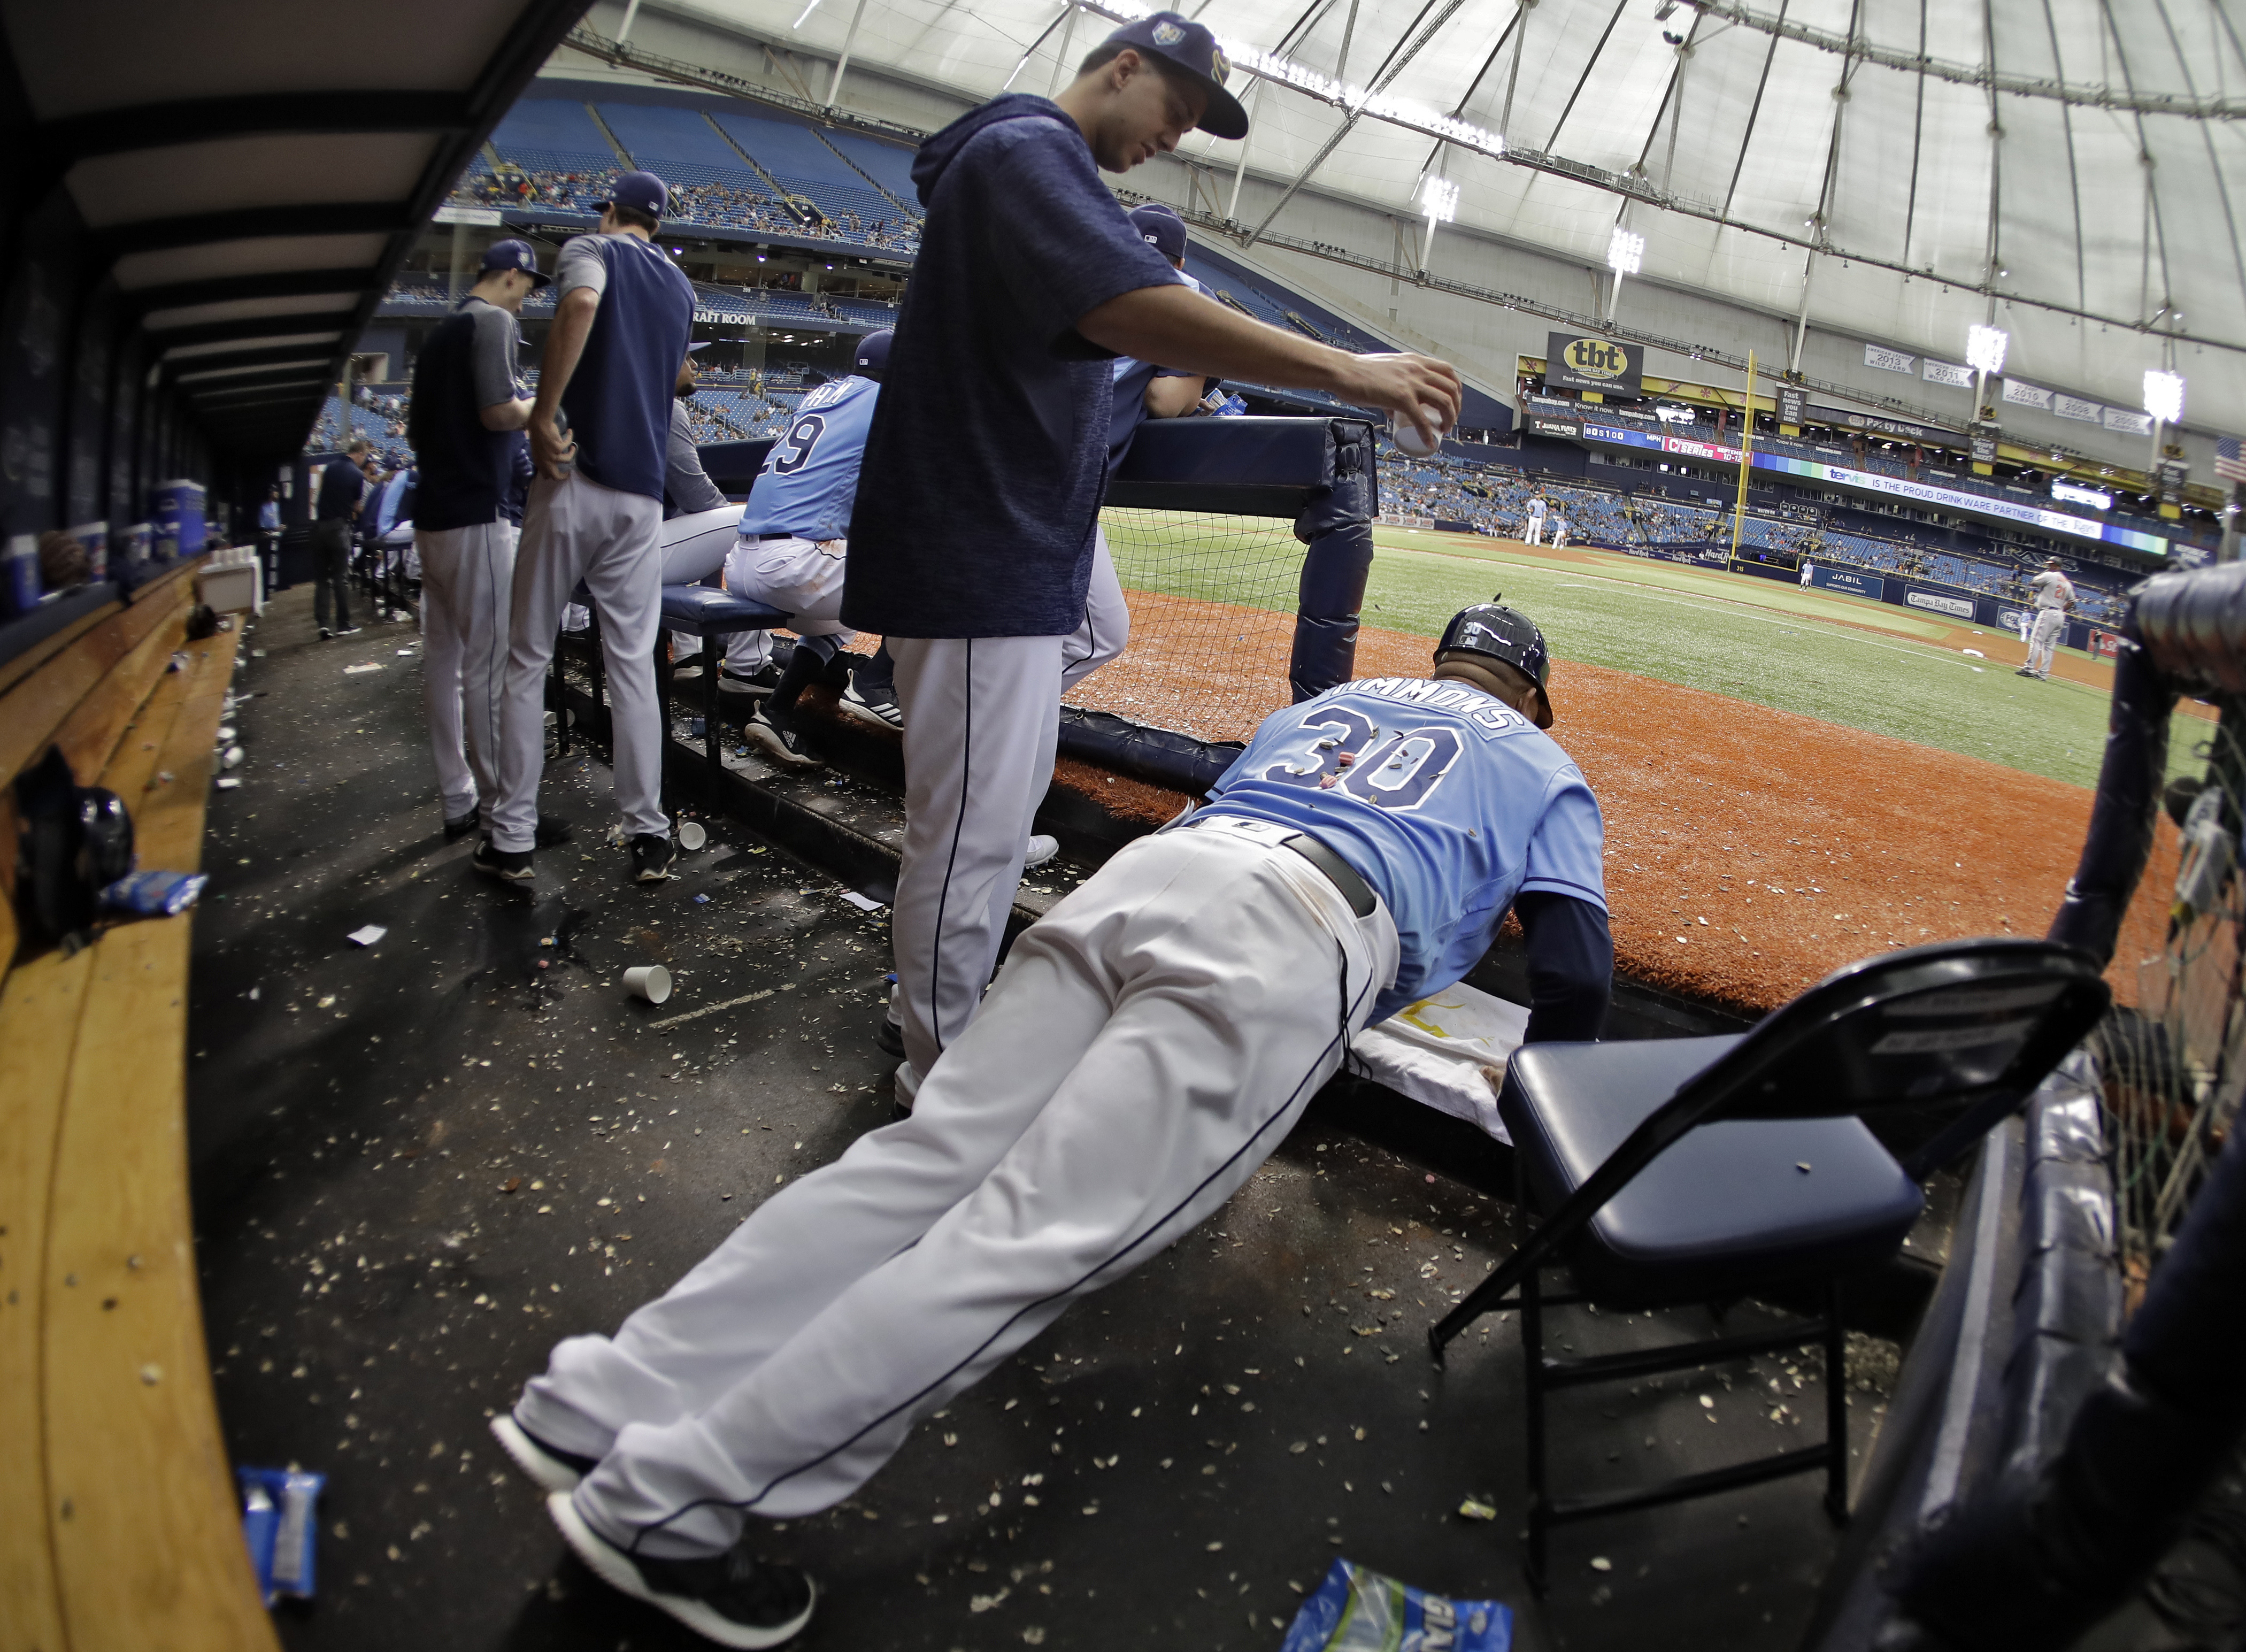 Rays fall despite Matsui's homer in debut with team